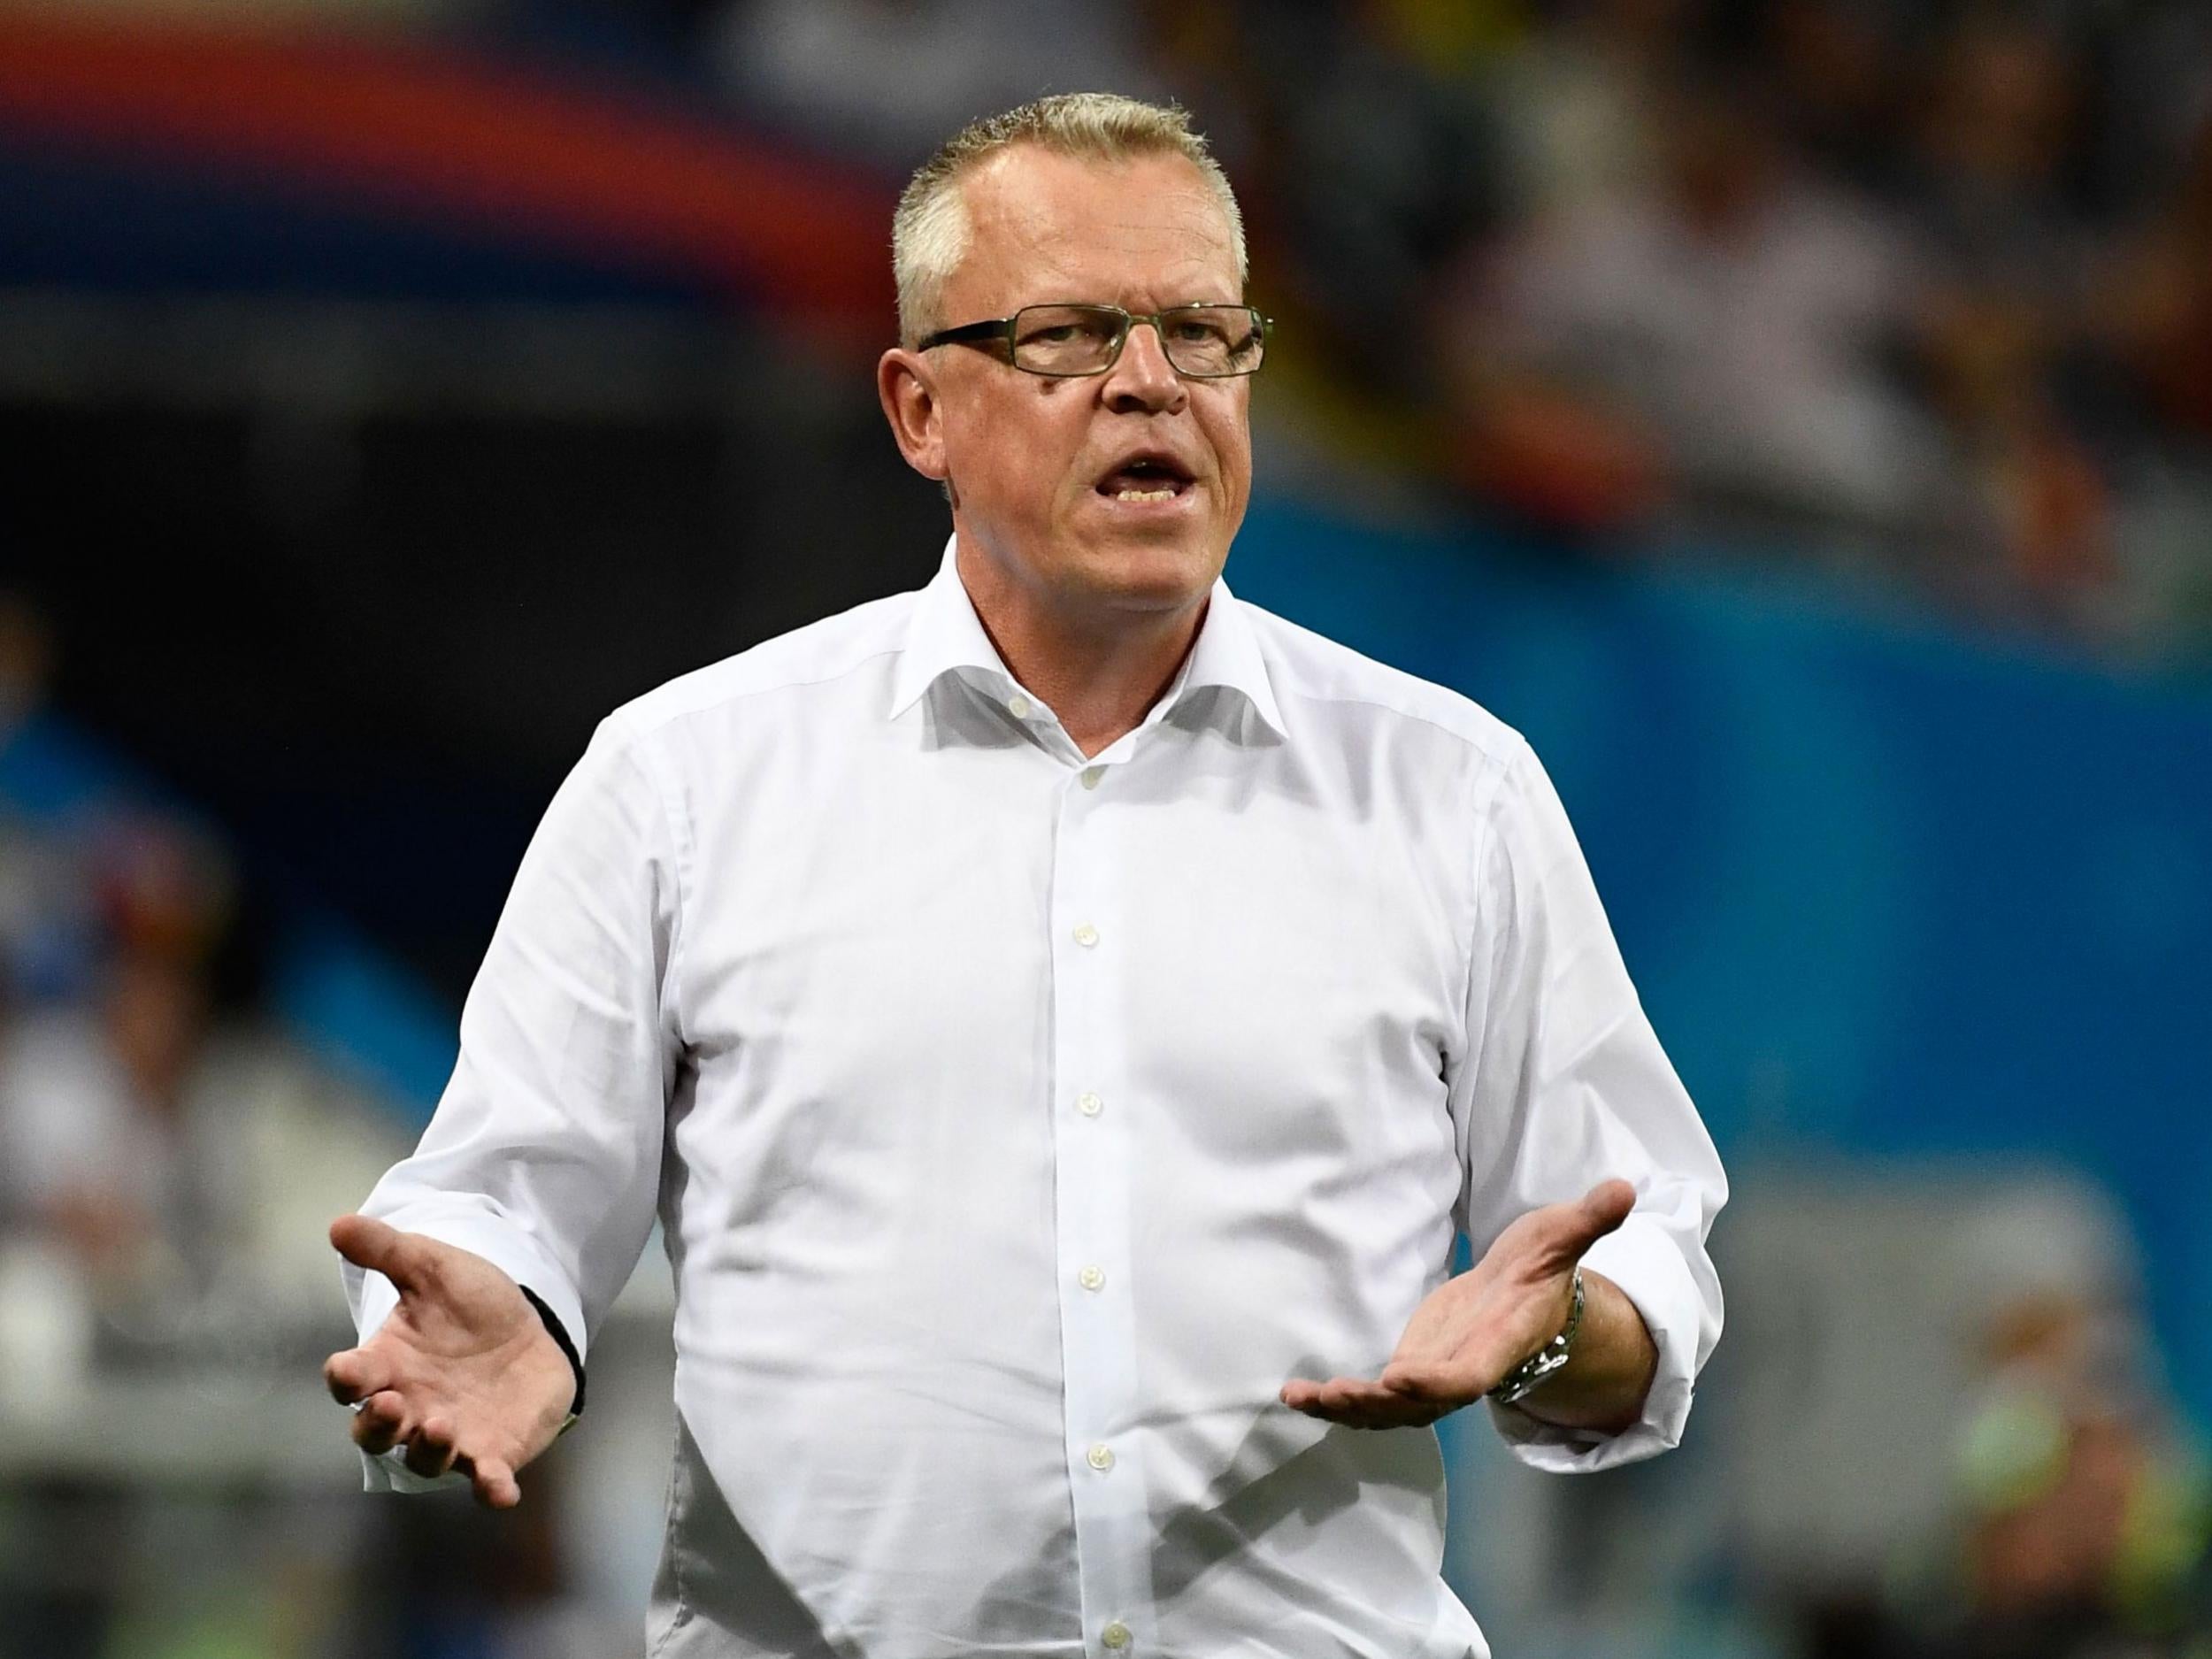 World Cup 2018: Sweden manager Janne Andersson accuses Germany of showing disrespect after Toni Kroos winner